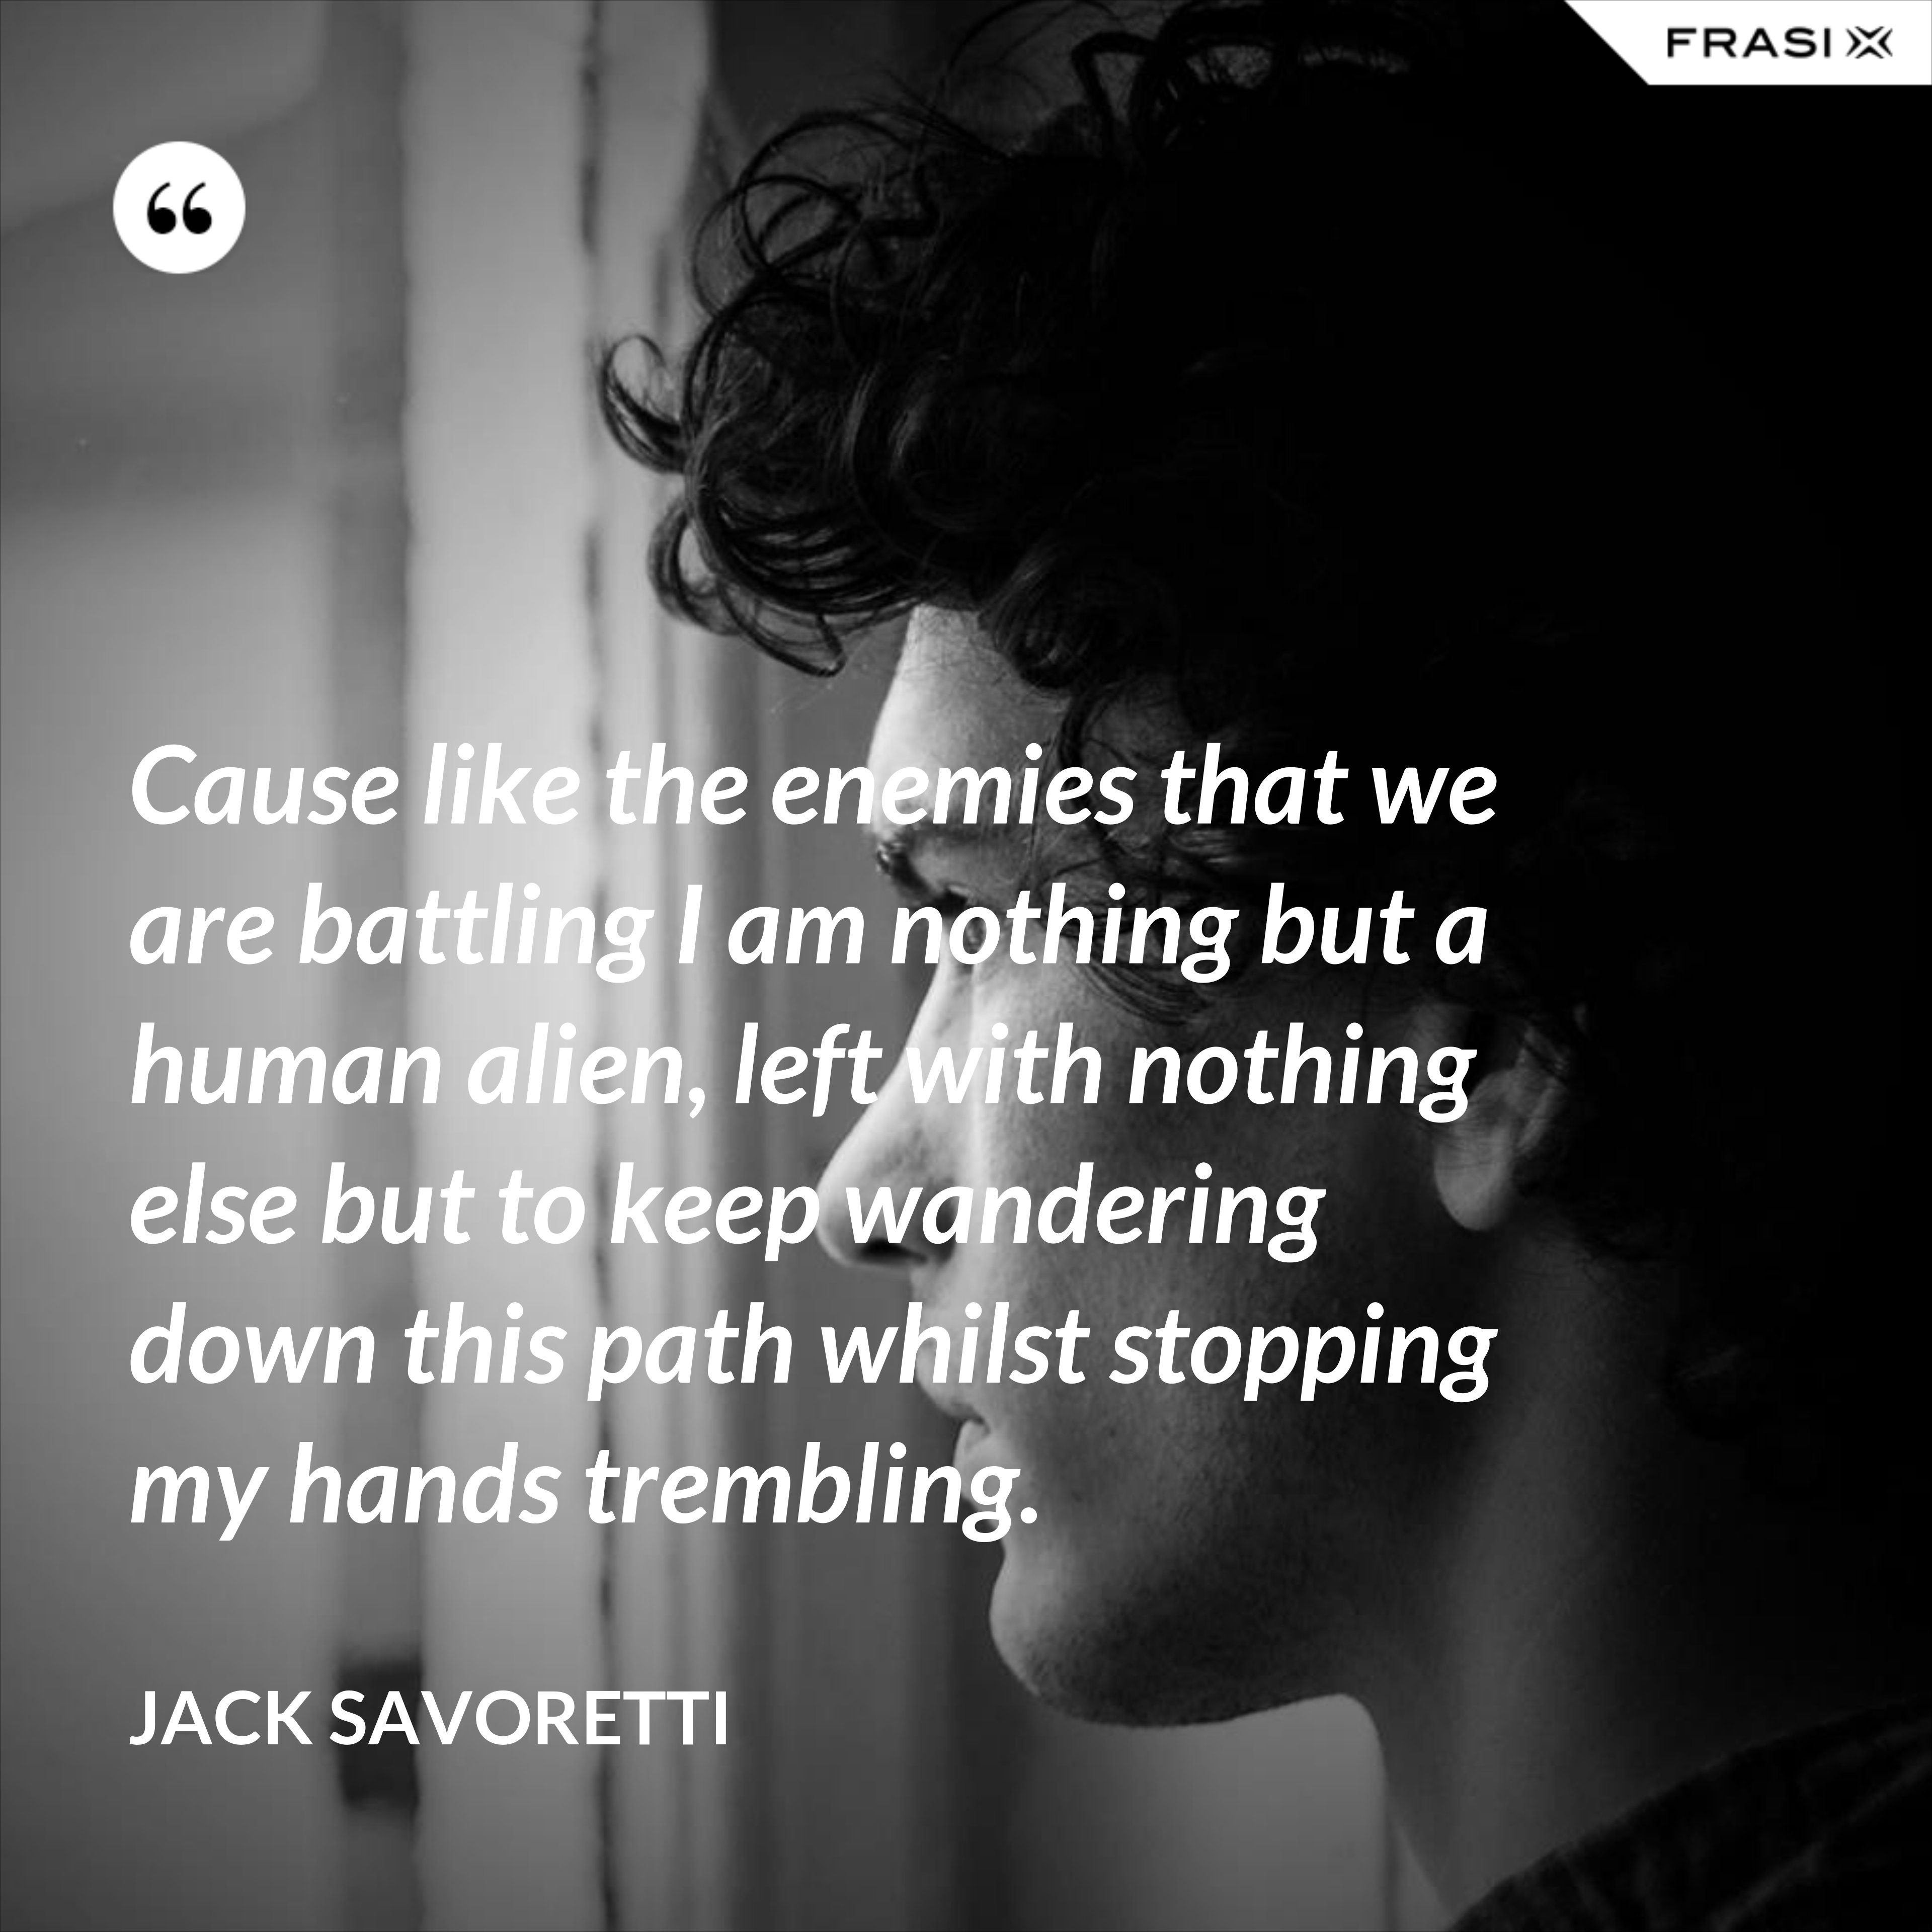 Cause like the enemies that we are battling I am nothing but a human alien, left with nothing else but to keep wandering down this path whilst stopping my hands trembling. - Jack Savoretti